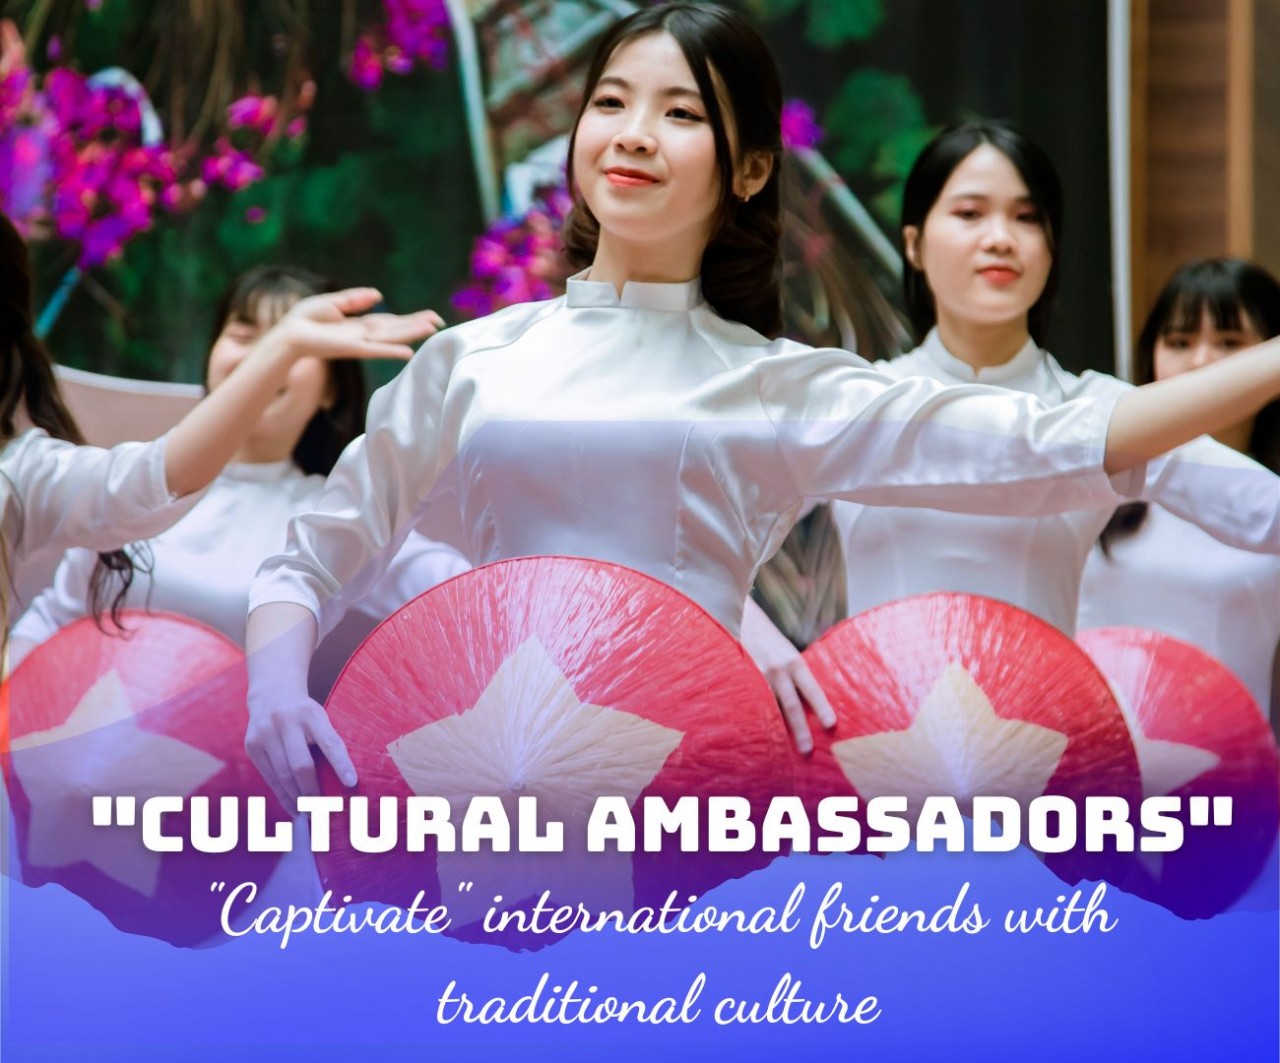 "Cultural Ambassadors": "Captivate" international friends with traditional culture